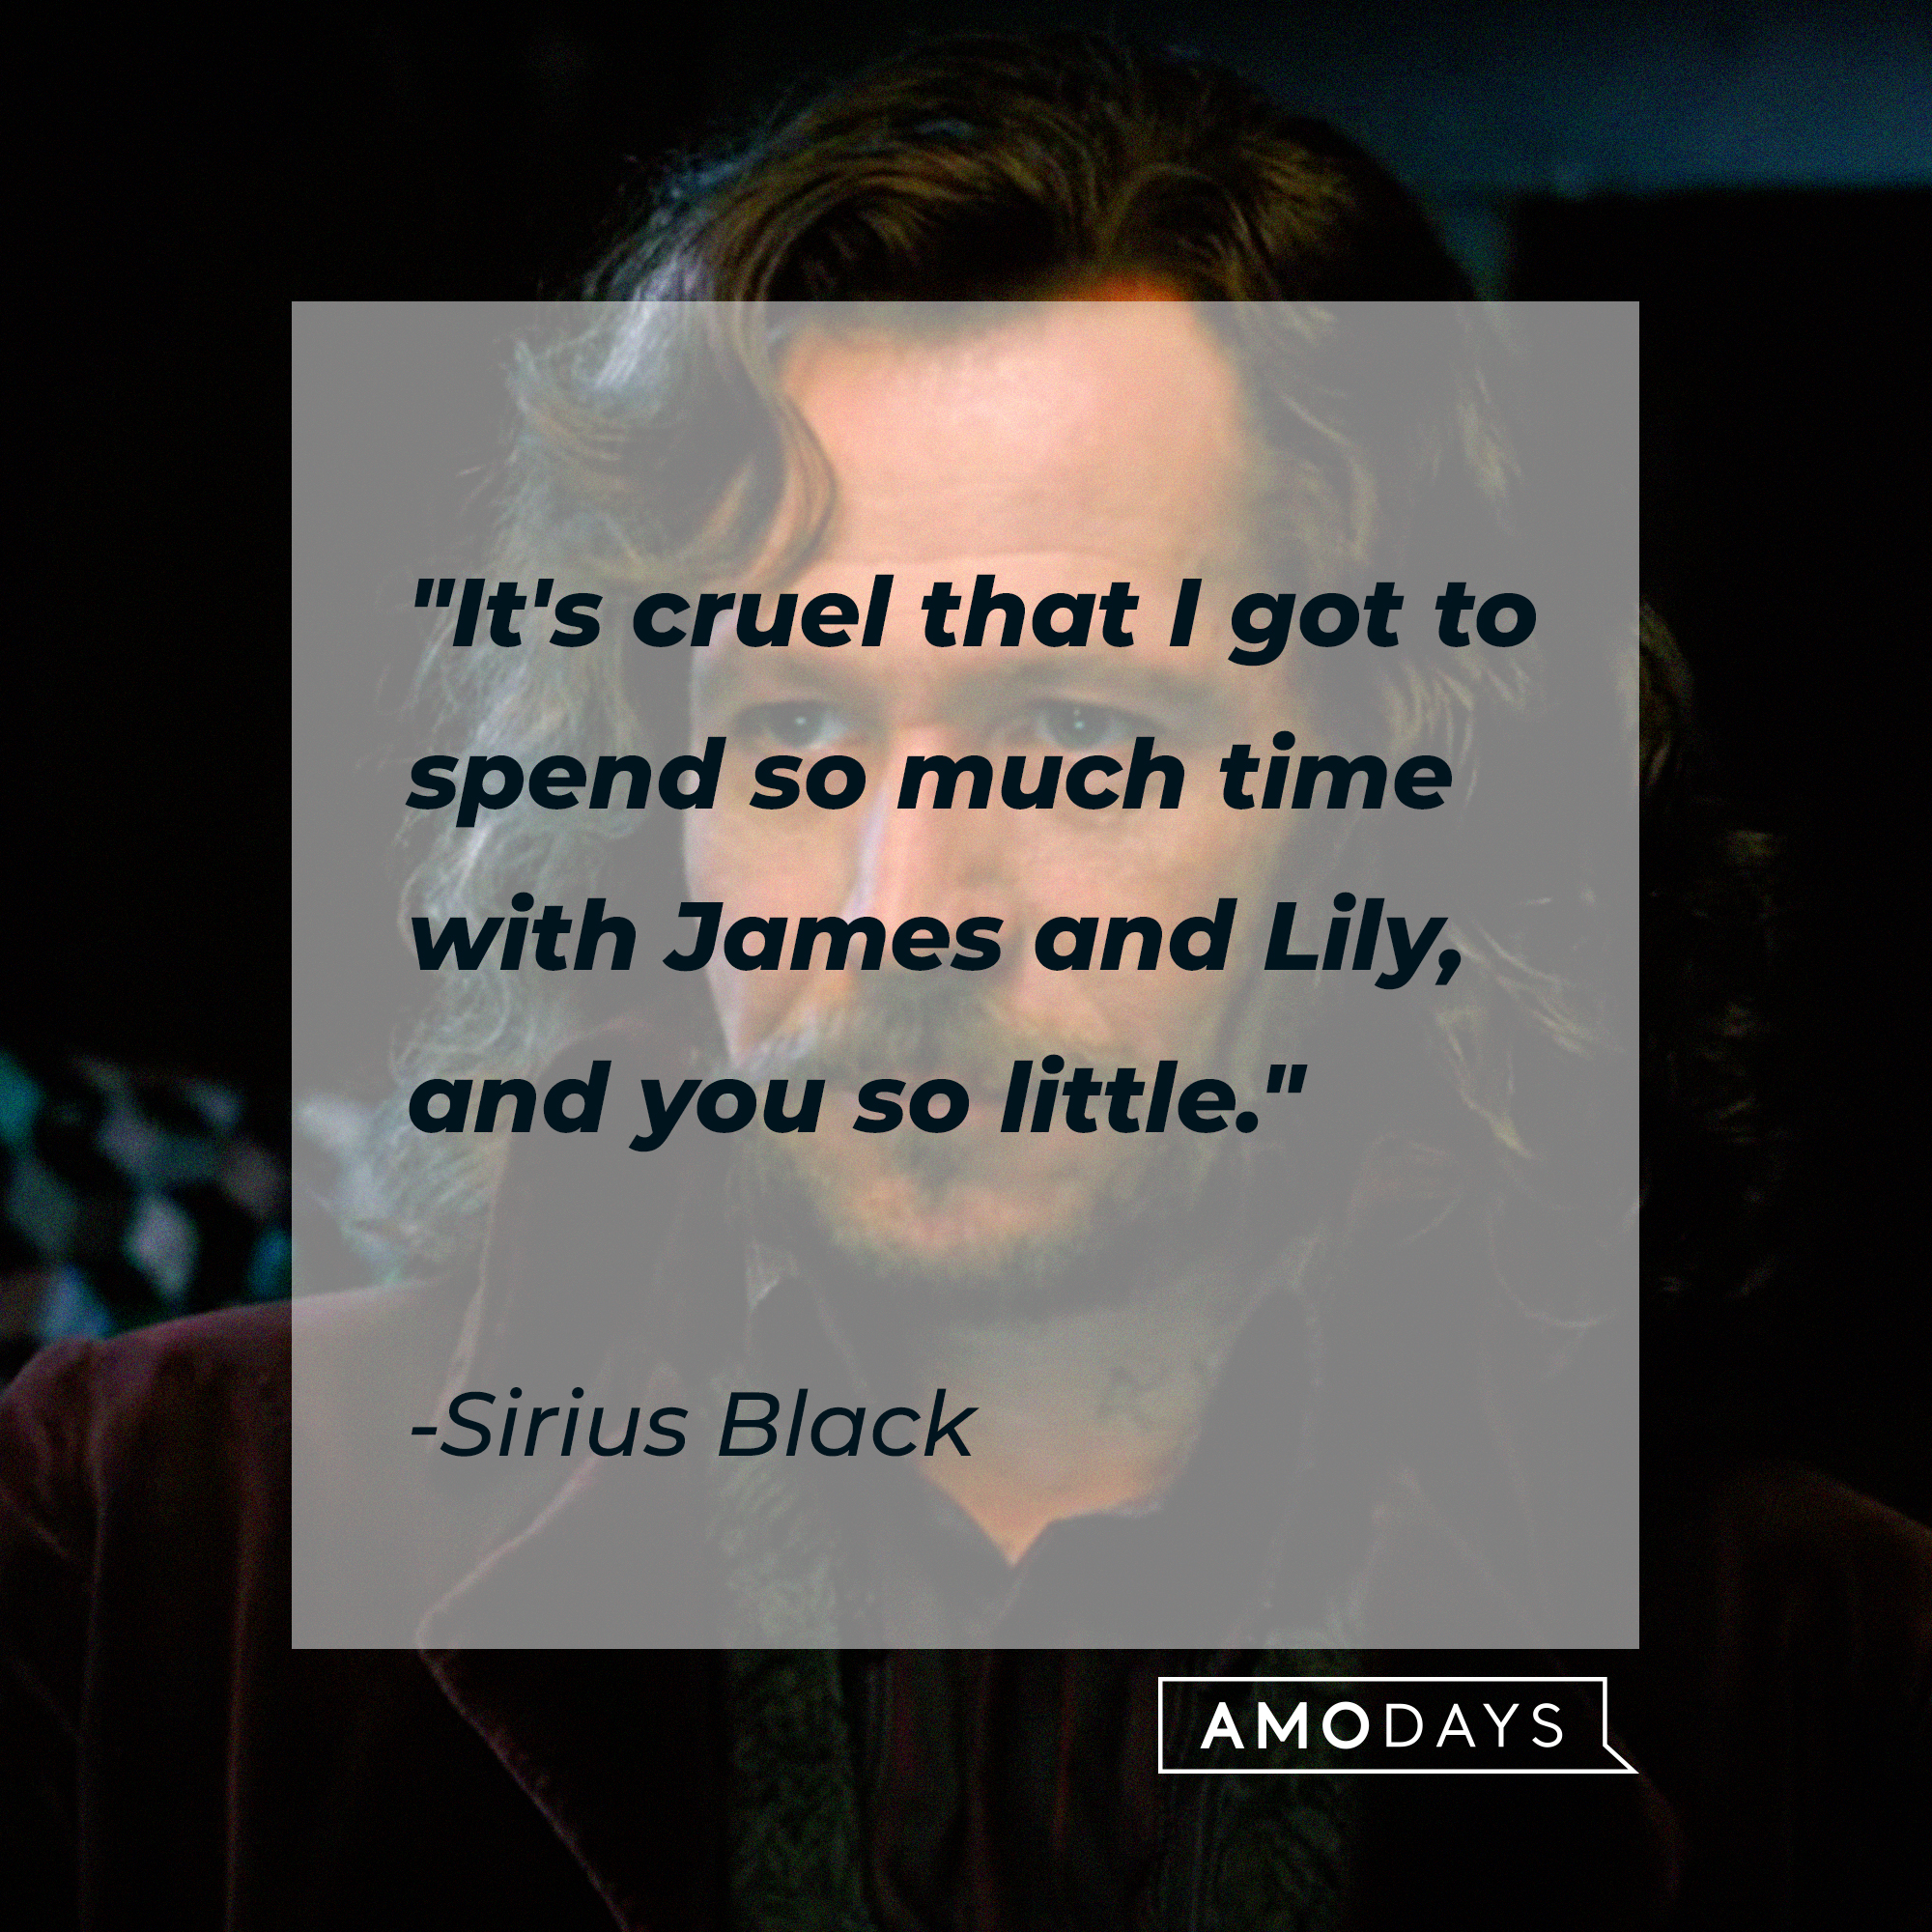 A photo of Sirius Black with his quote, "It's cruel that I got to spend so much time with James and Lily, and you so little." | Source: YouTube/harrypotter